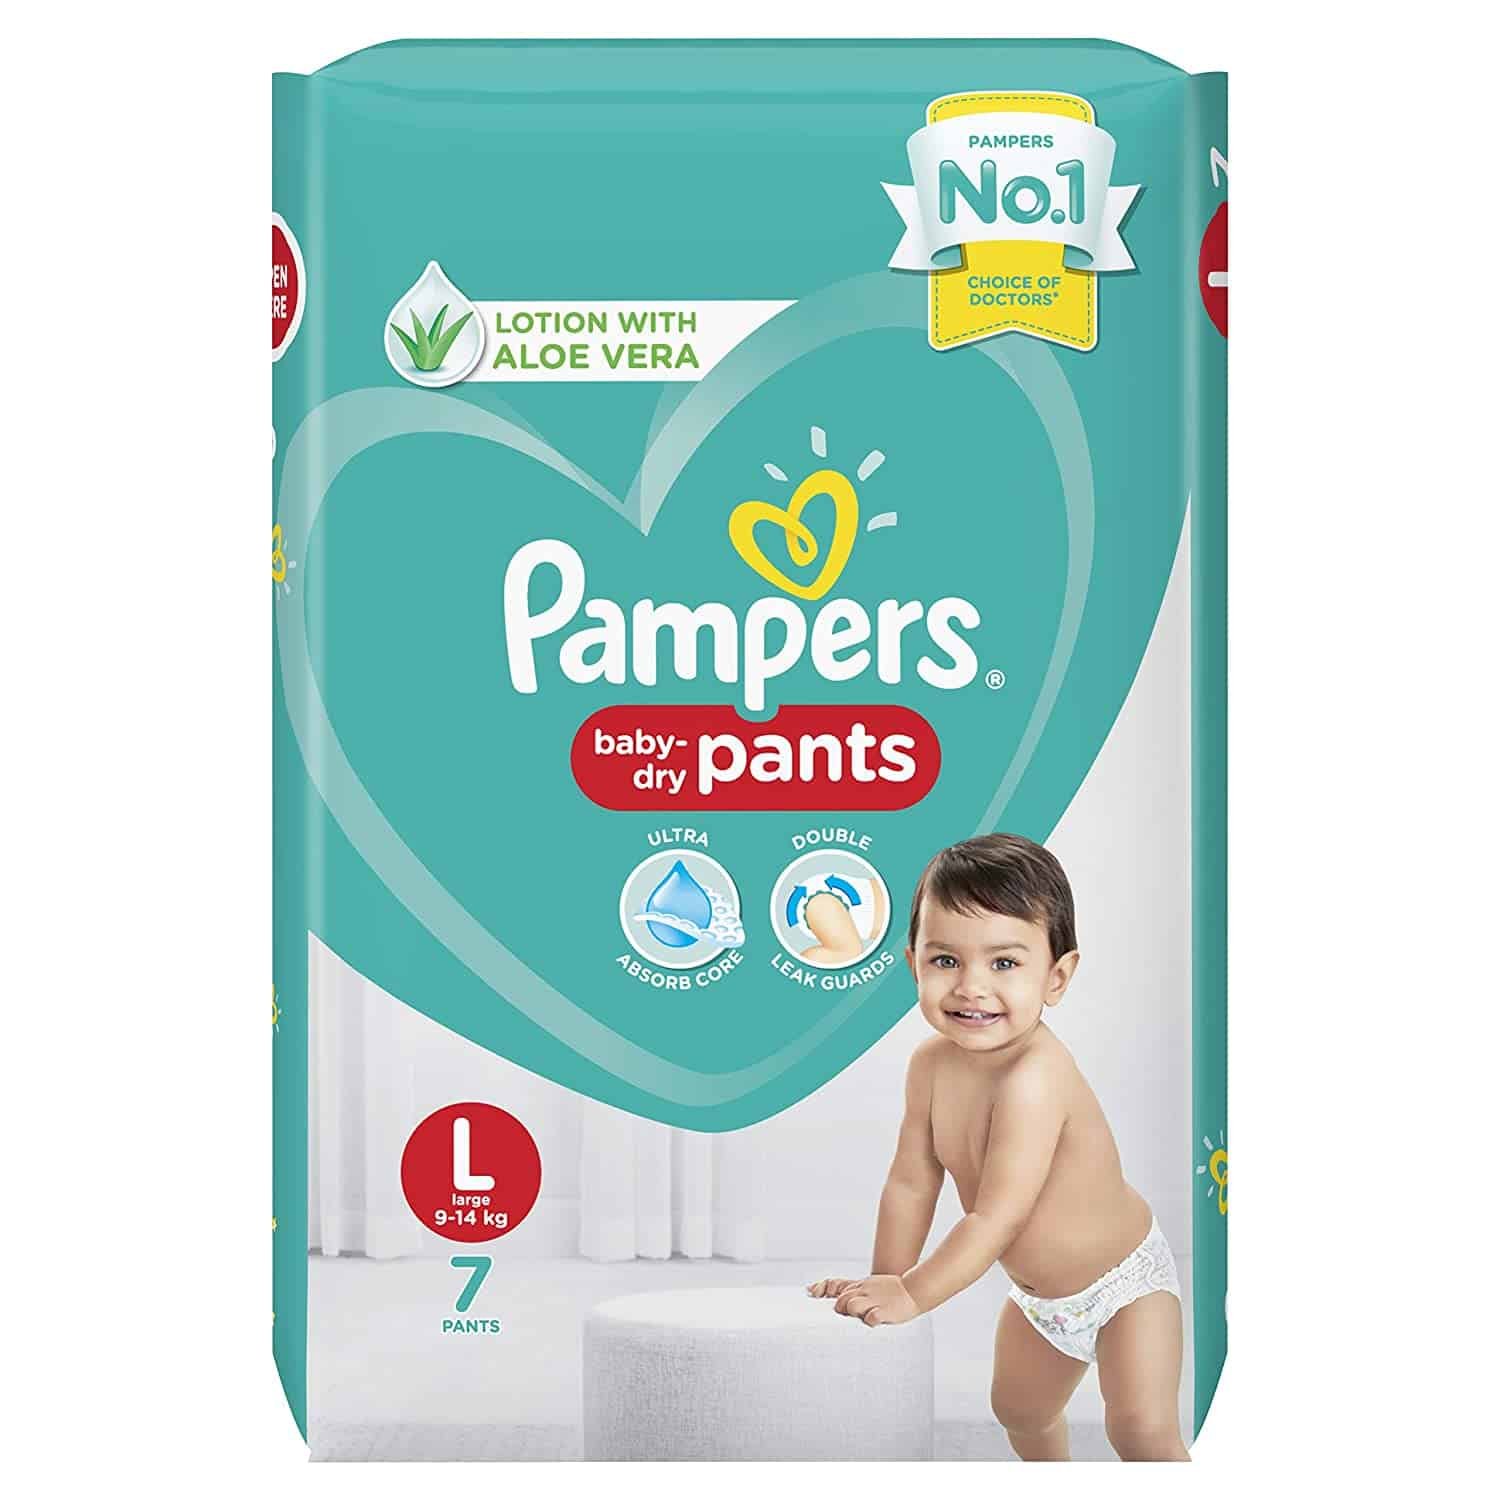 Pampers Pants, Size 6, Extra Large, 16+ kg, Jumbo Box, 56 Diapers : Buy  Online at Best Price in KSA - Souq is now Amazon.sa: Baby Products